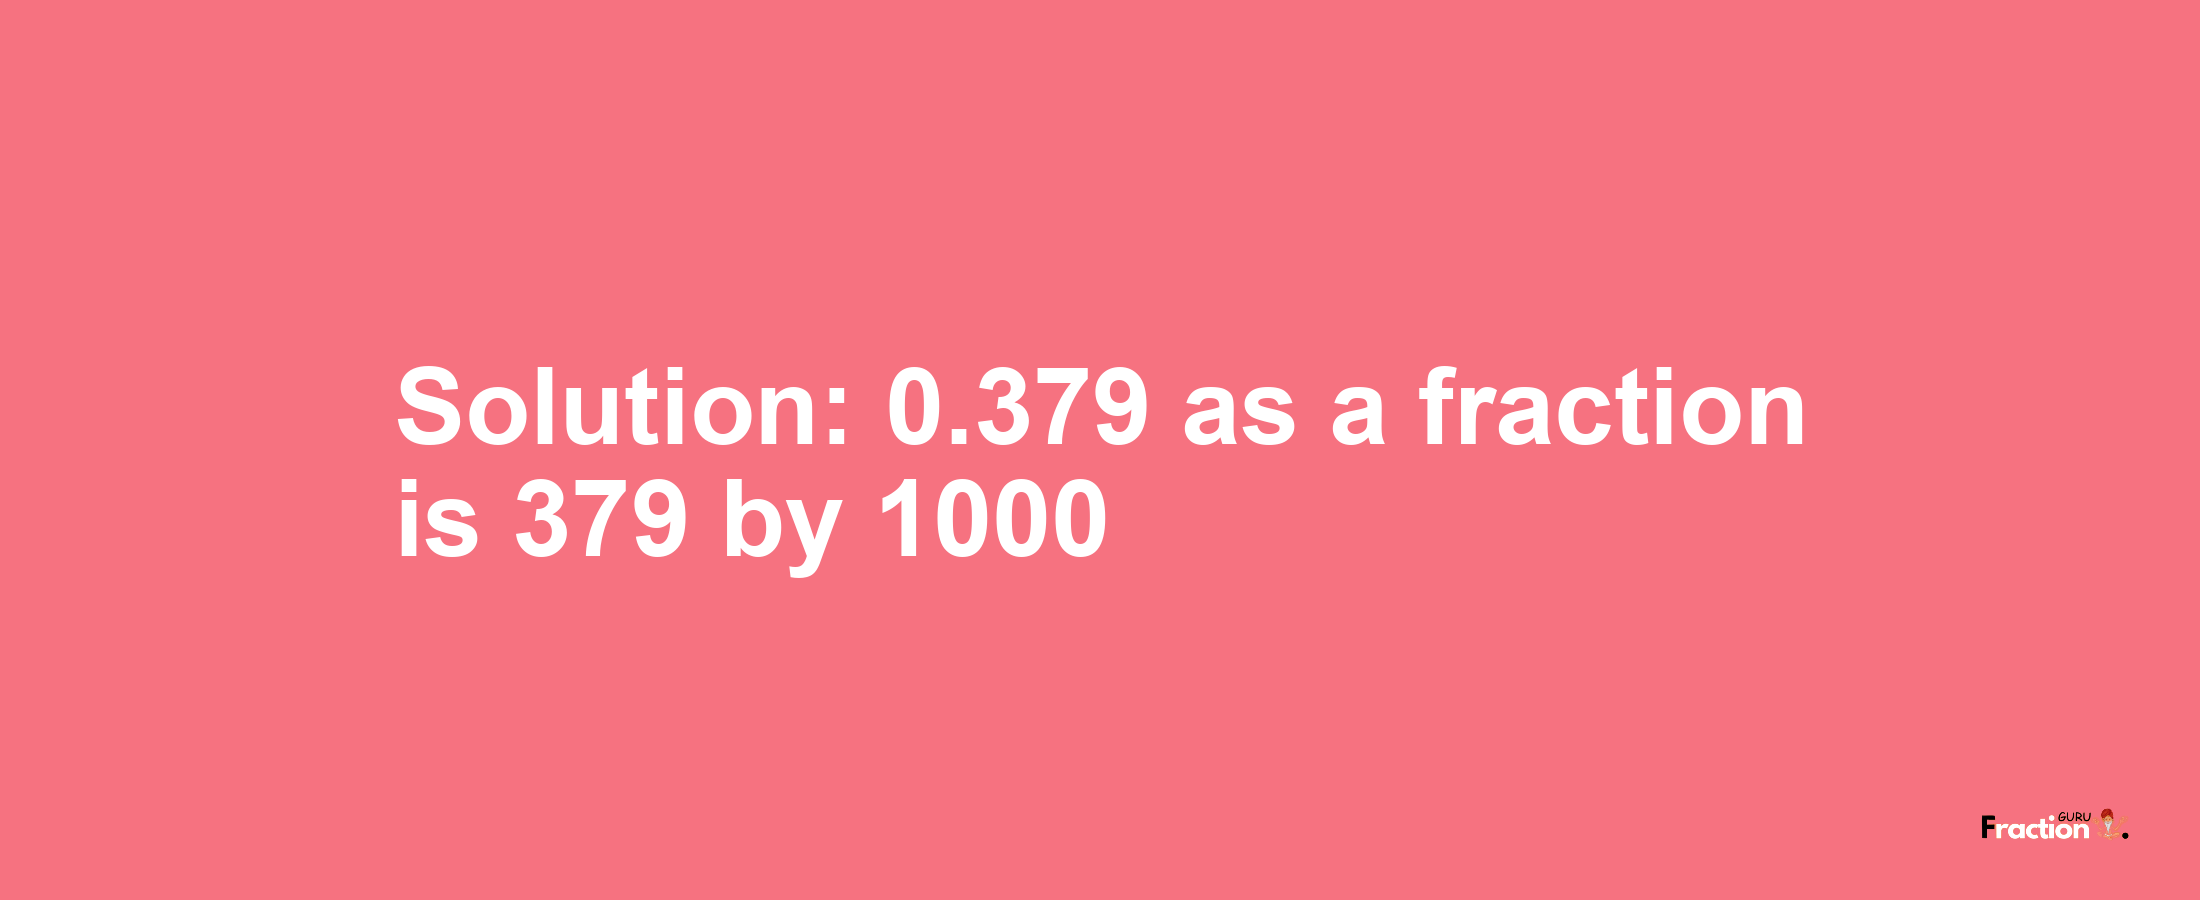 Solution:0.379 as a fraction is 379/1000